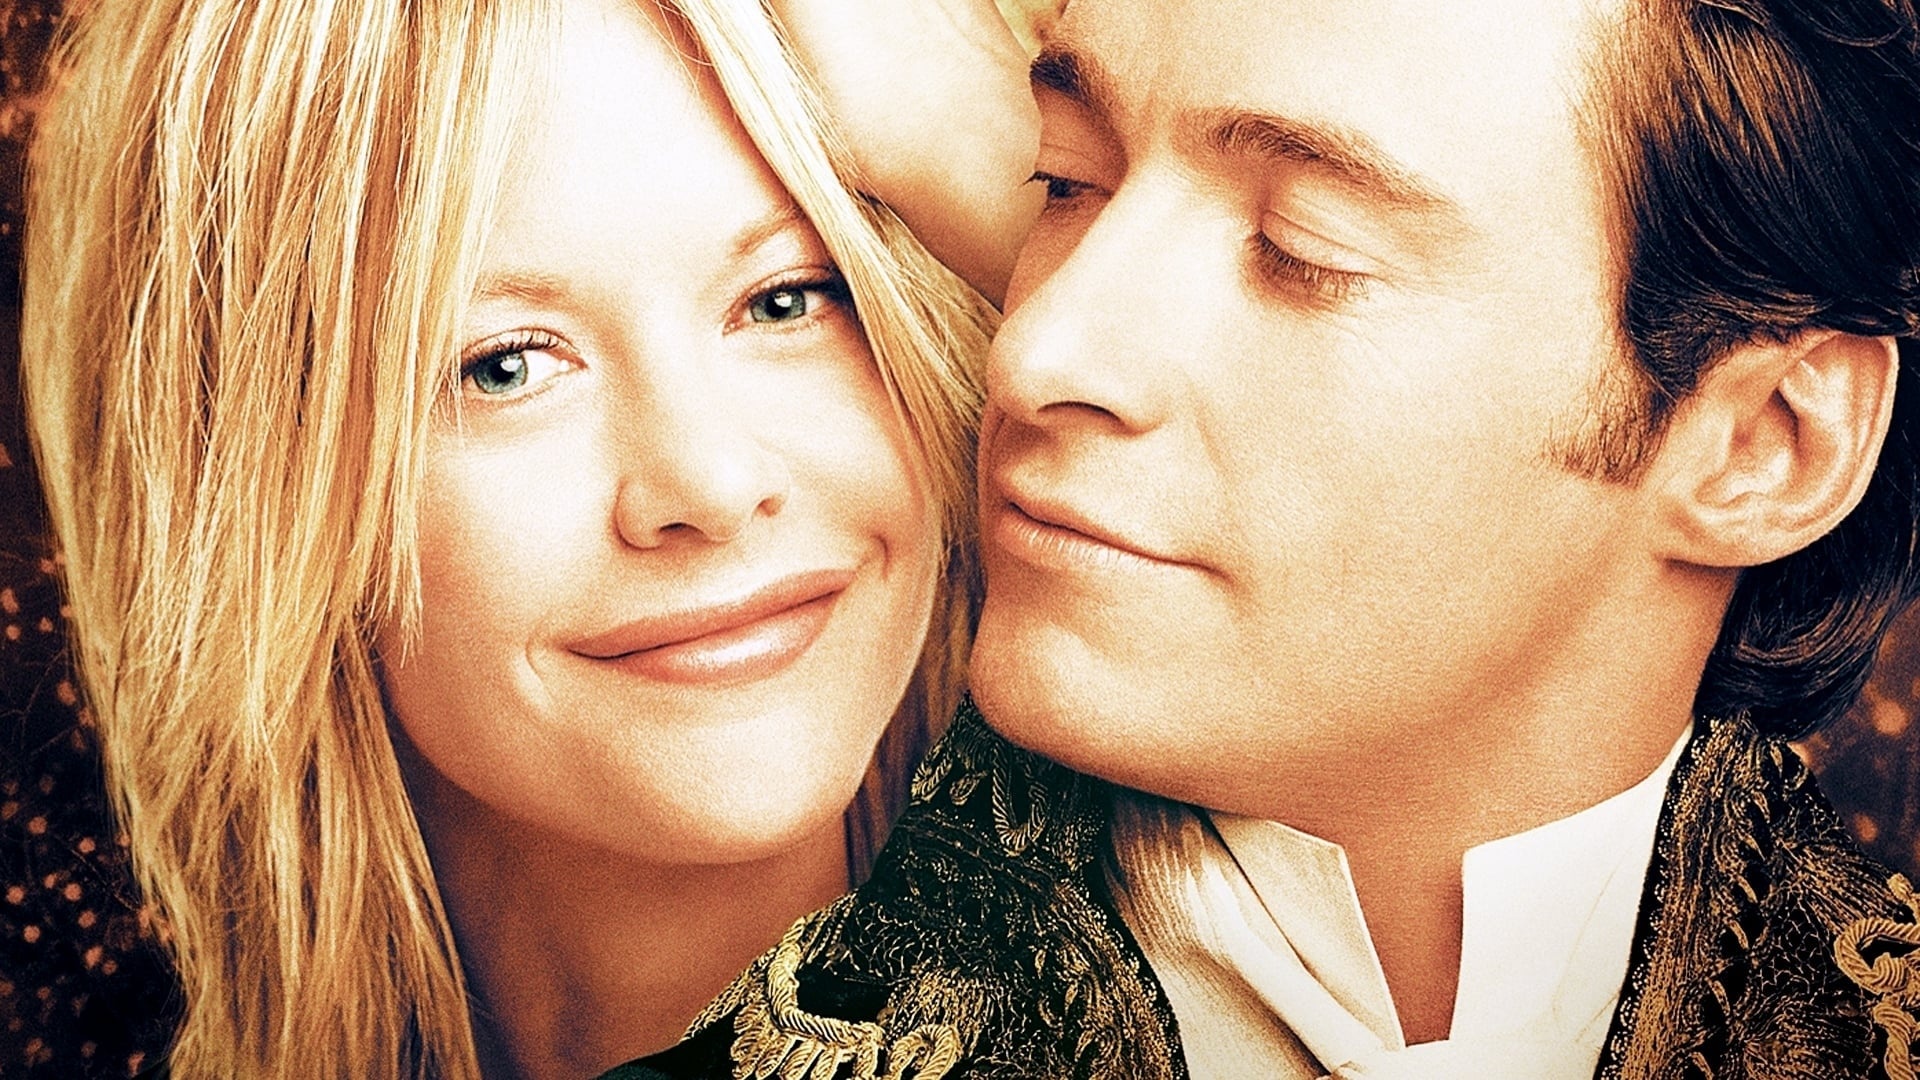 Kate and Leopold: The film follows a 19th-century Duke and an ambitious 21st-century businesswoman. 1920x1080 Full HD Wallpaper.